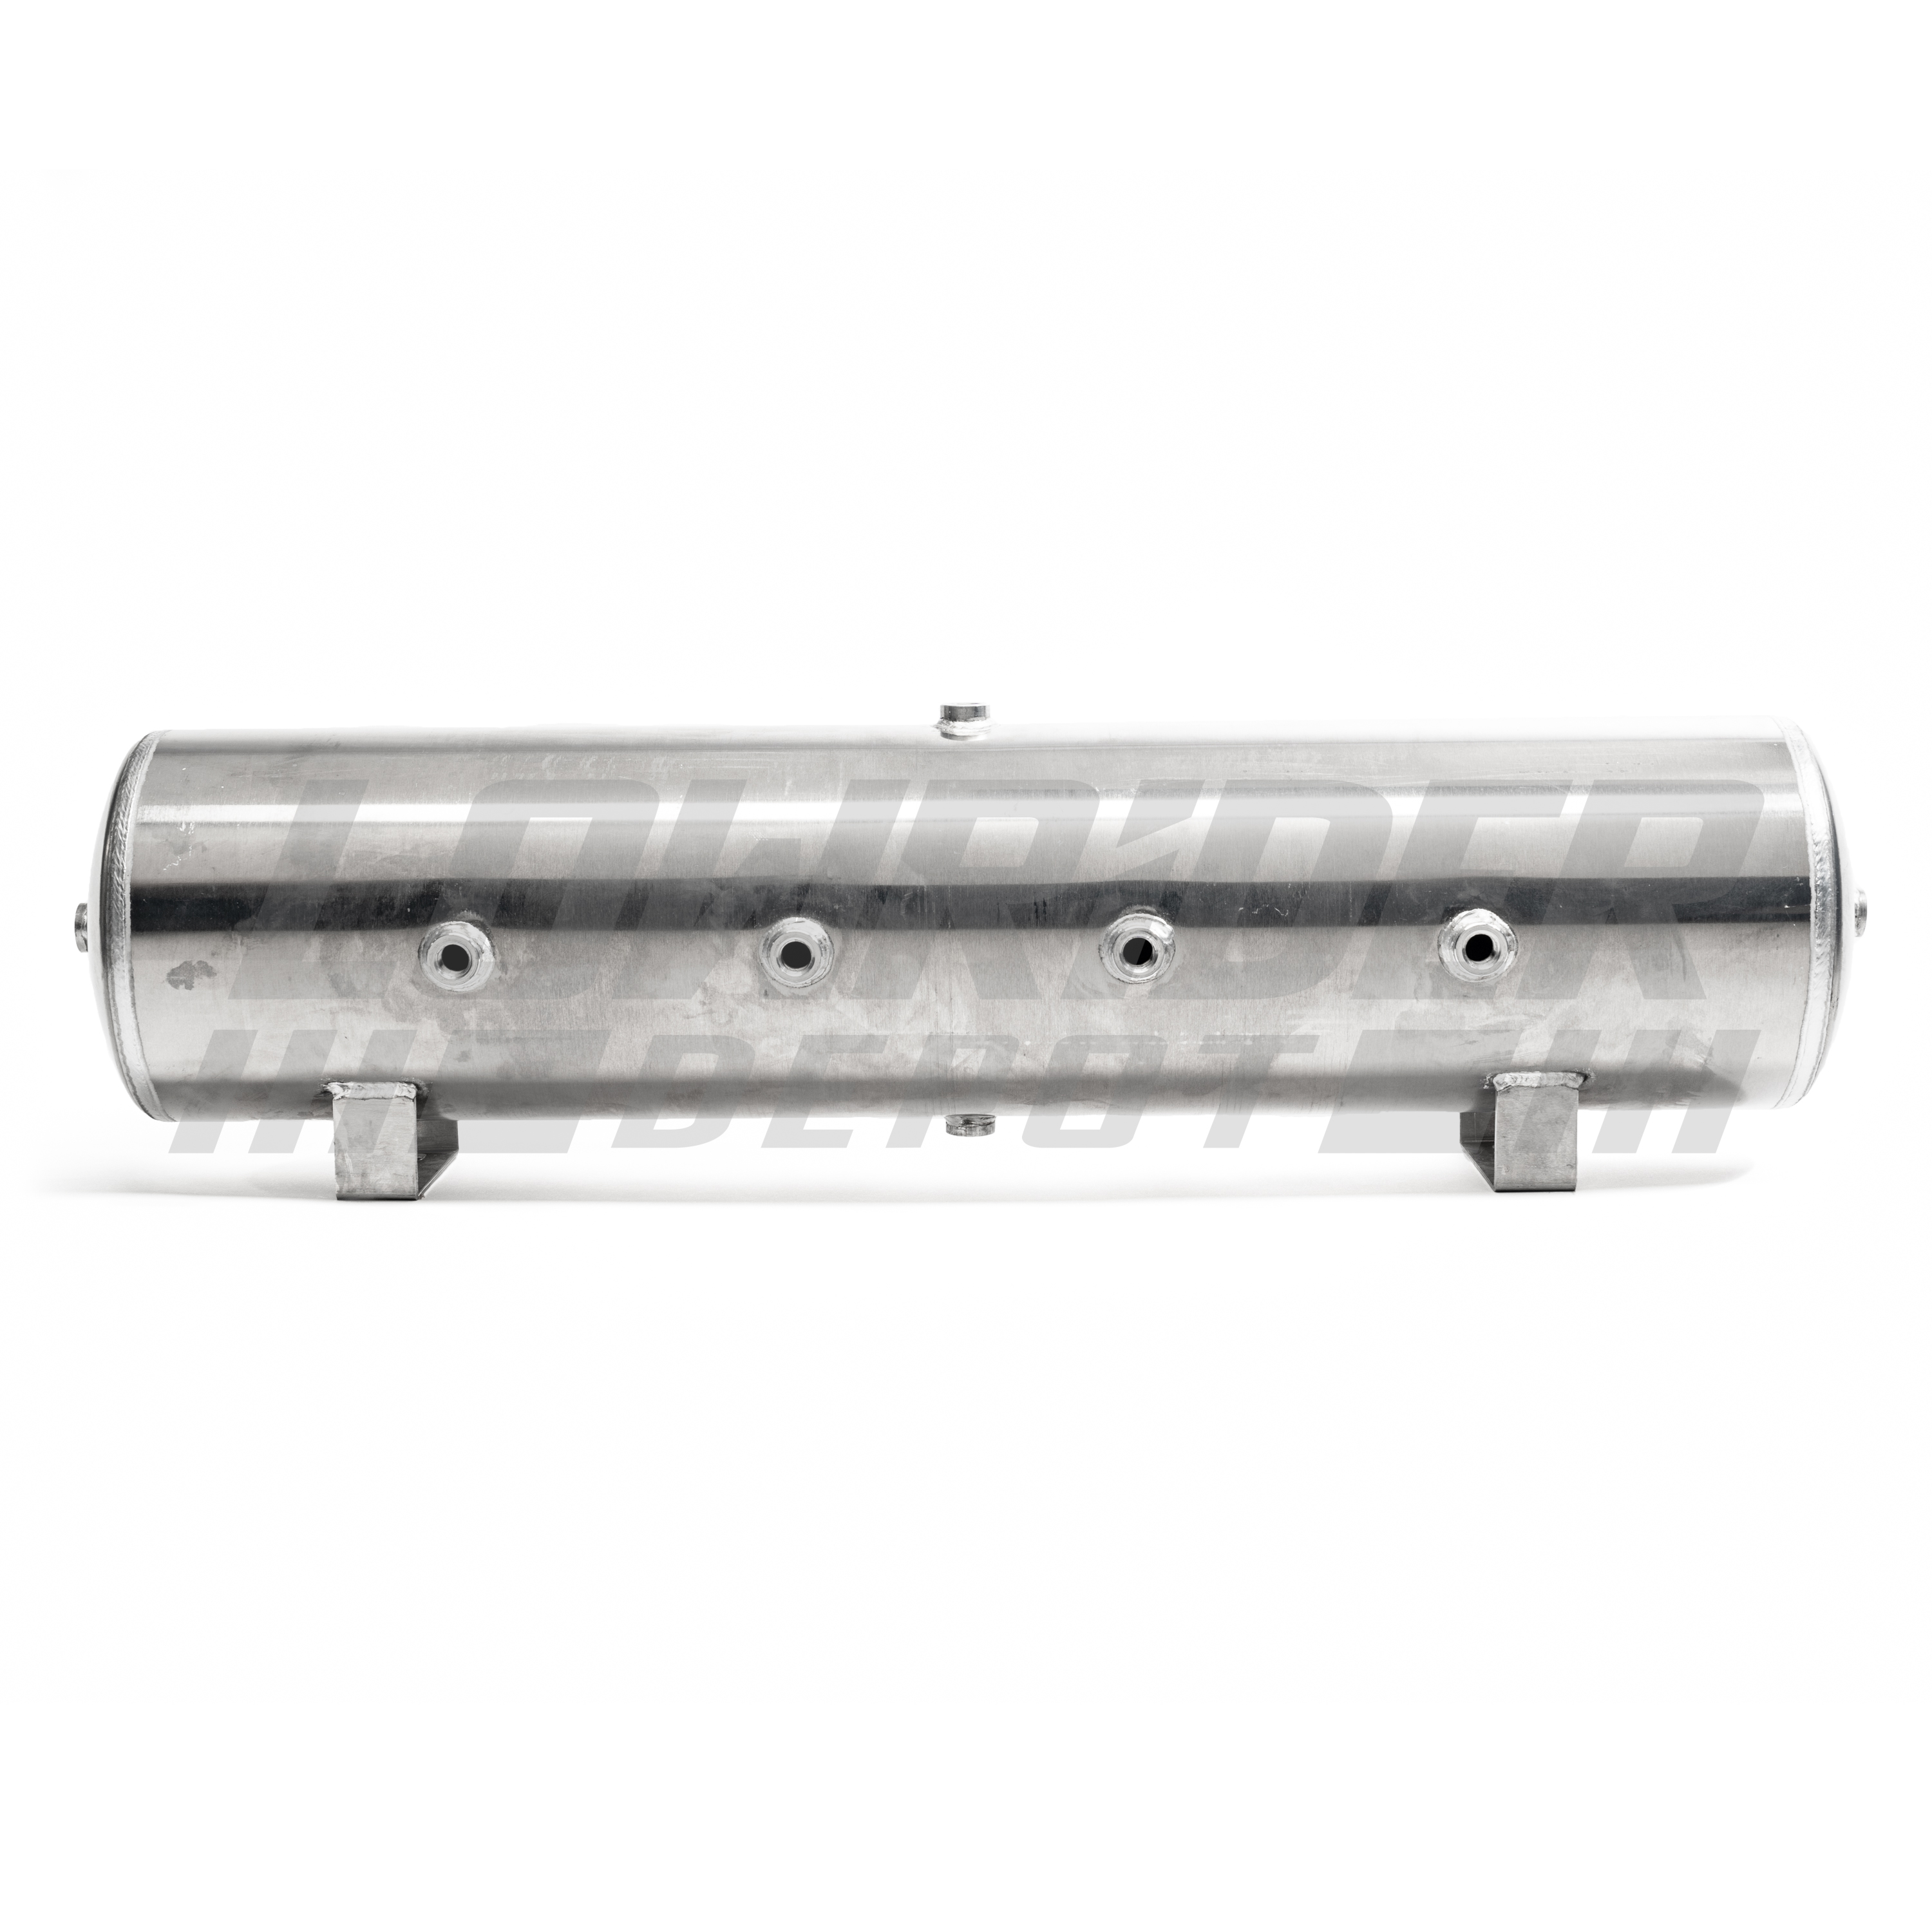 LRD-12 Gallon Aluminum Air Tank (8) 1/2" ports ports 44"L X 12.5"H EQUIVALENT TO AIR LIFT 10997 DOT APPROVED (4 ports on face 1 port on top/bottom & each end) 111197